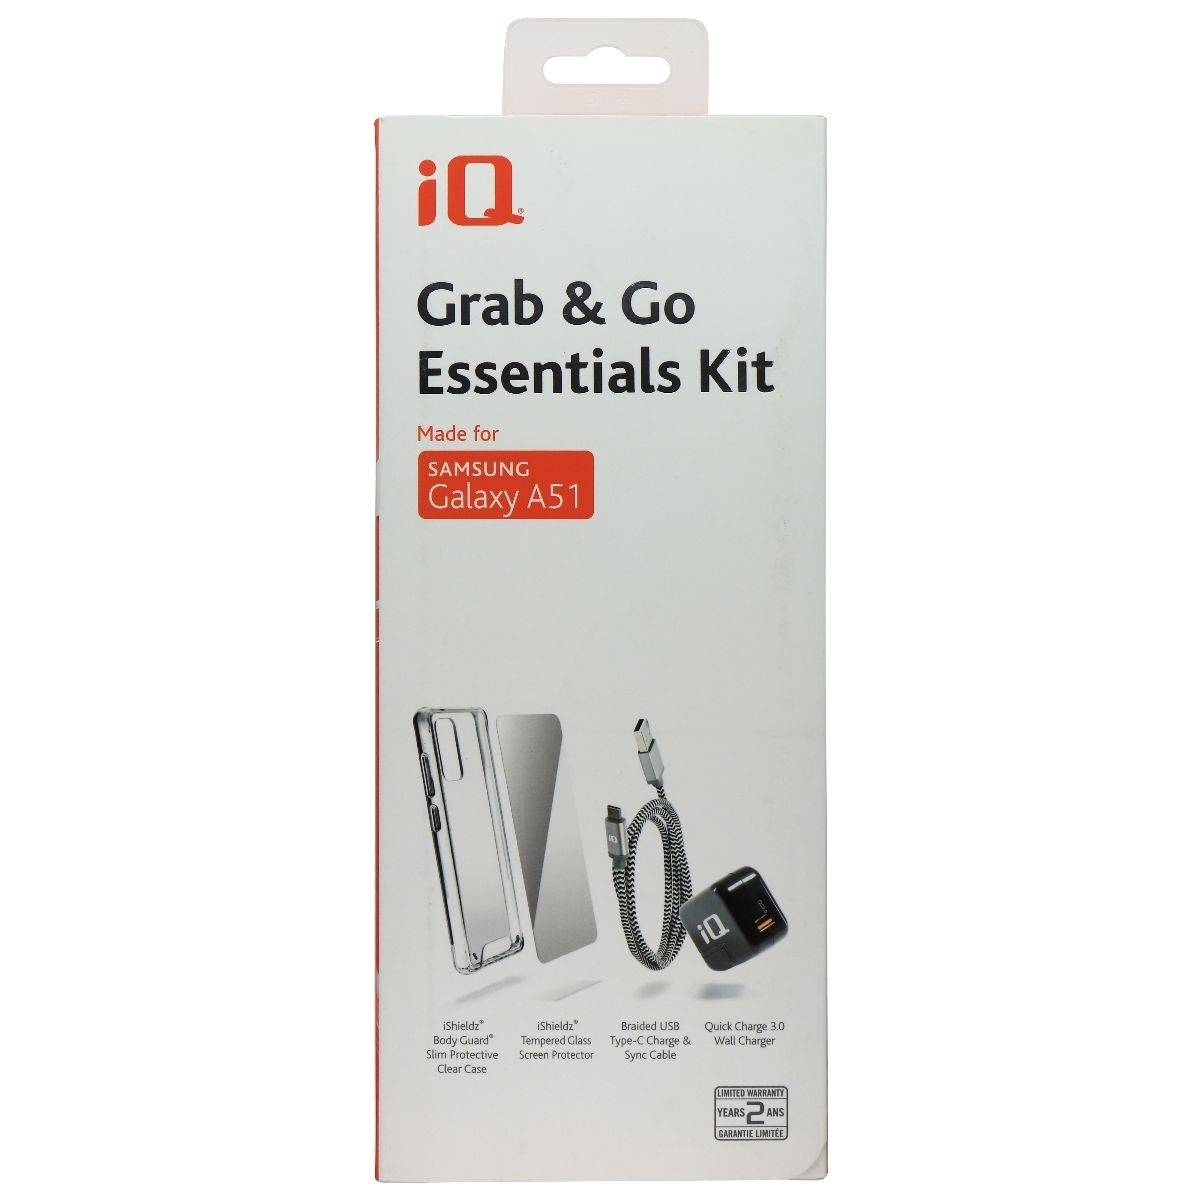 IQ Grab & Go Essentials Kit Charger And Case Kit For Galaxy A51 (2019) - Clear (Refurbished)